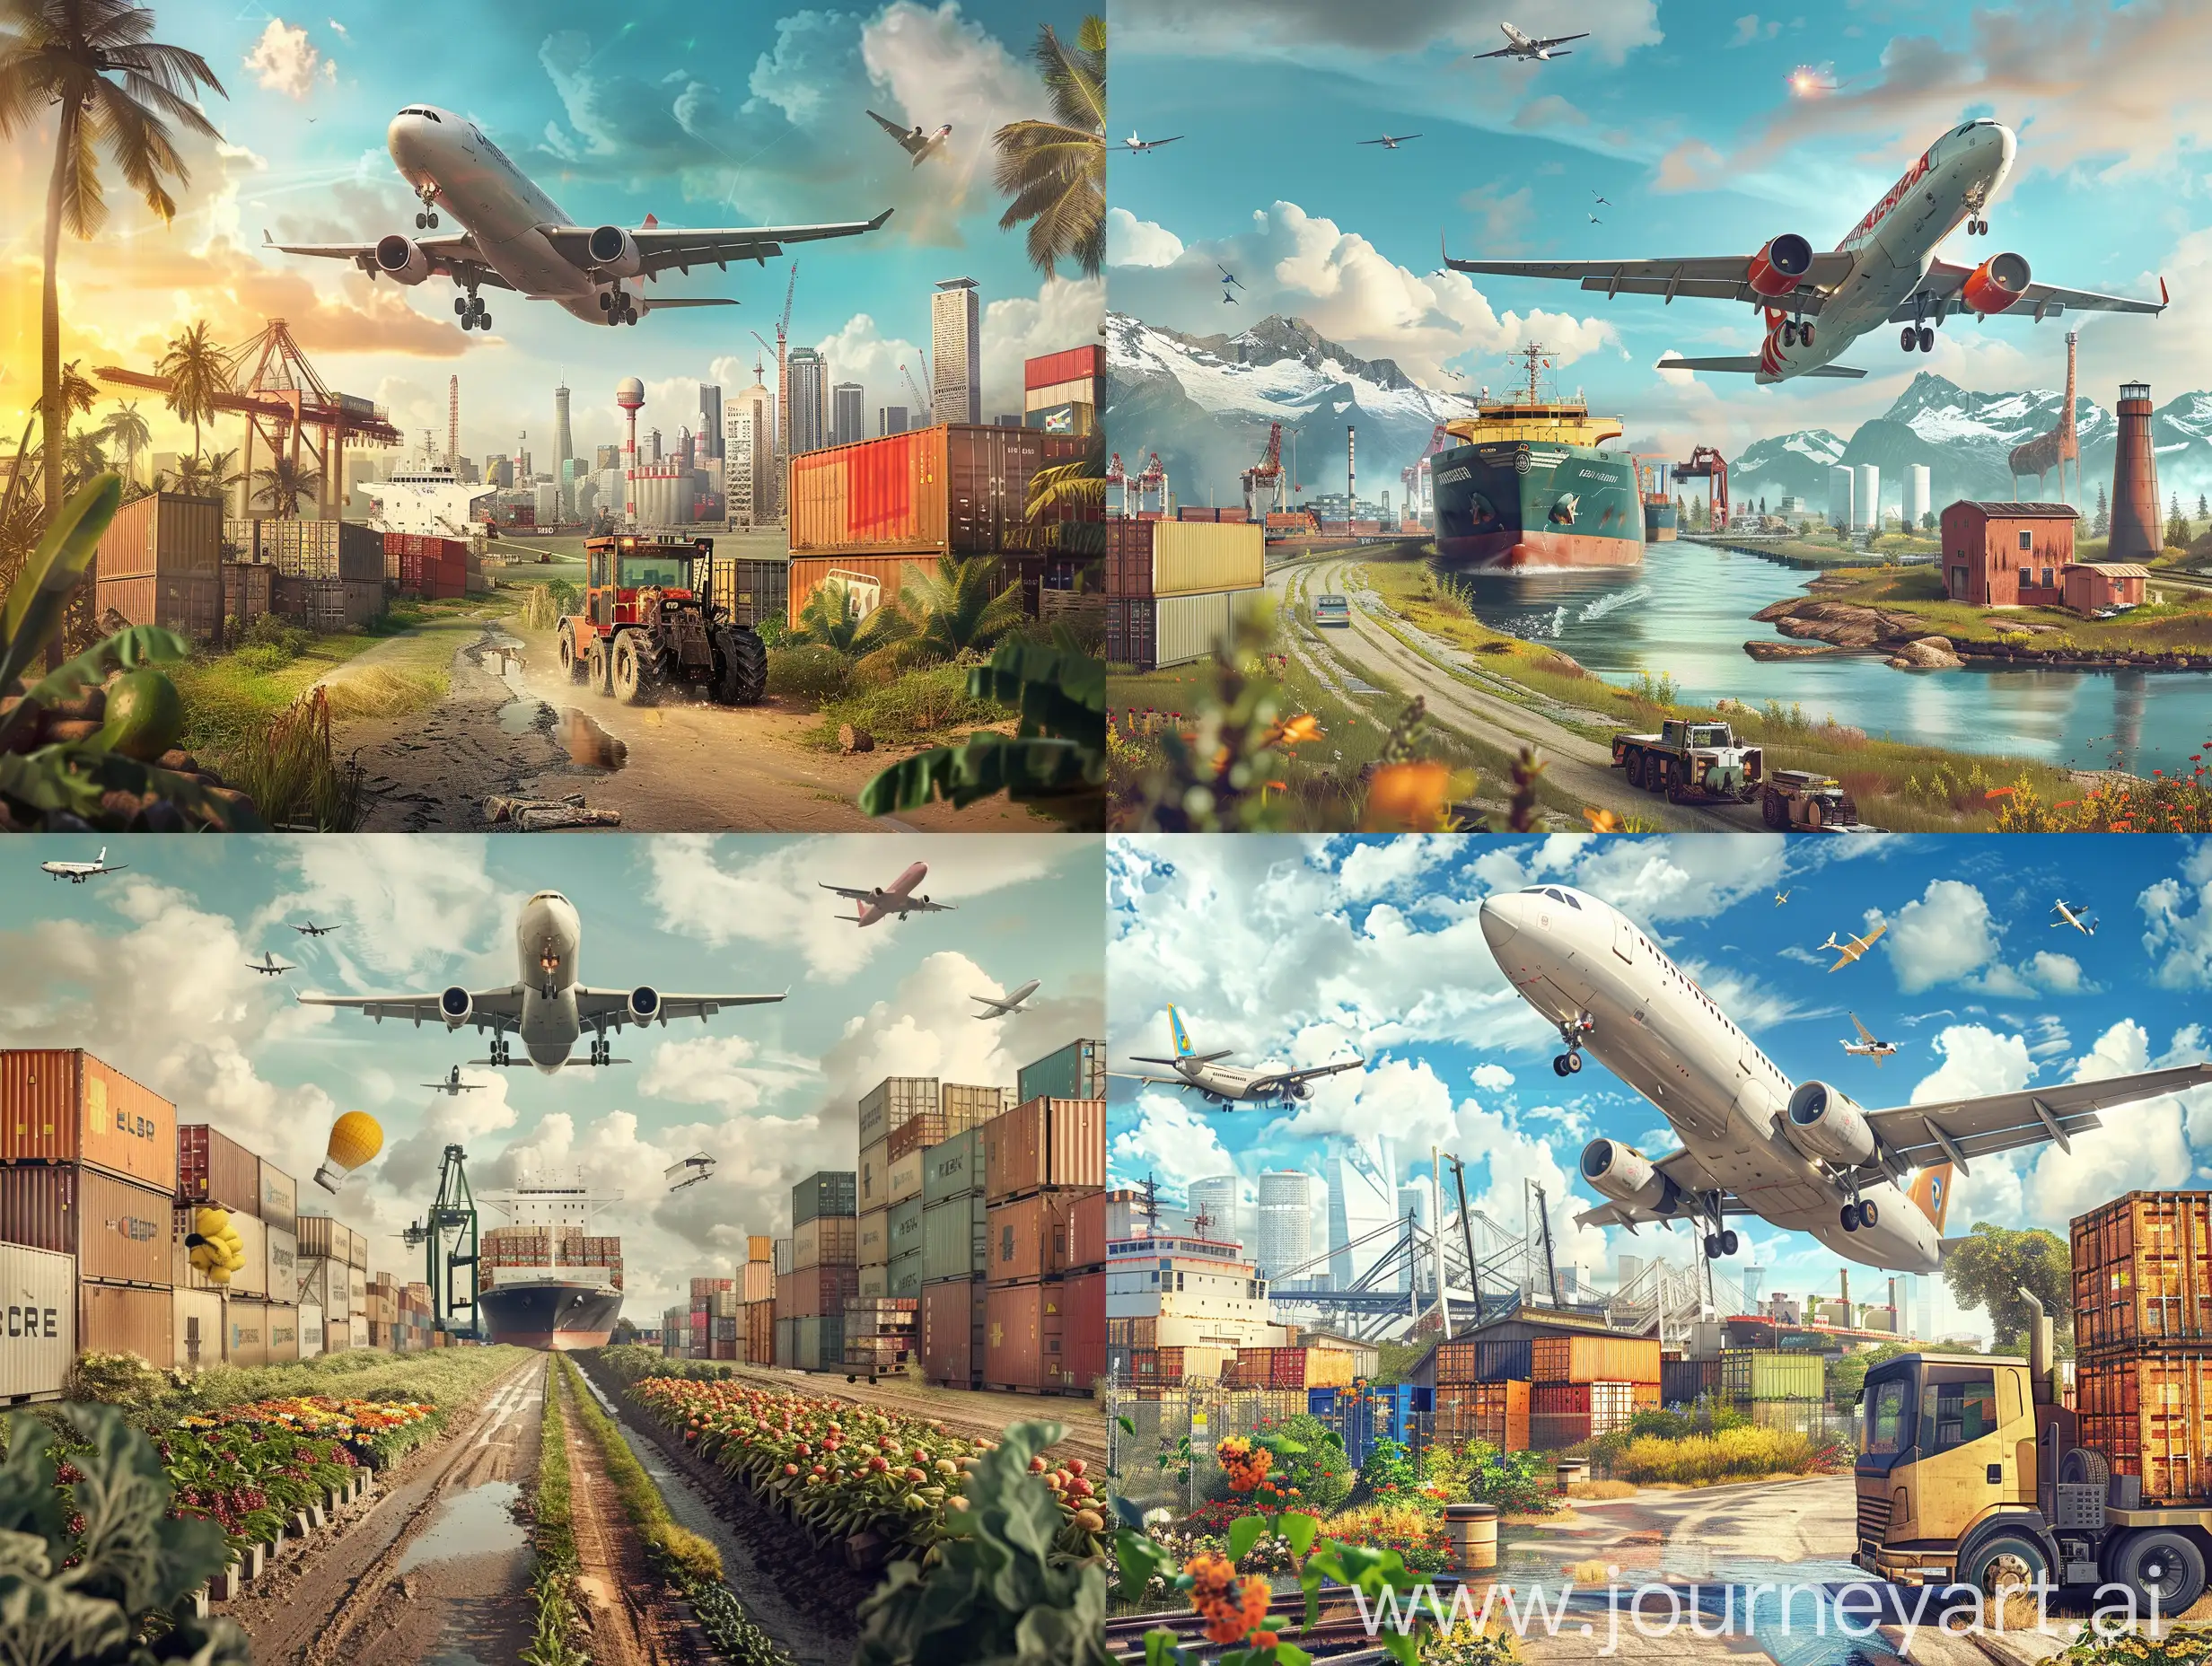 International-Trade-and-Logistics-Realistic-Illustration-with-Airplane-Cargo-Ship-Containers-and-Farm-Products